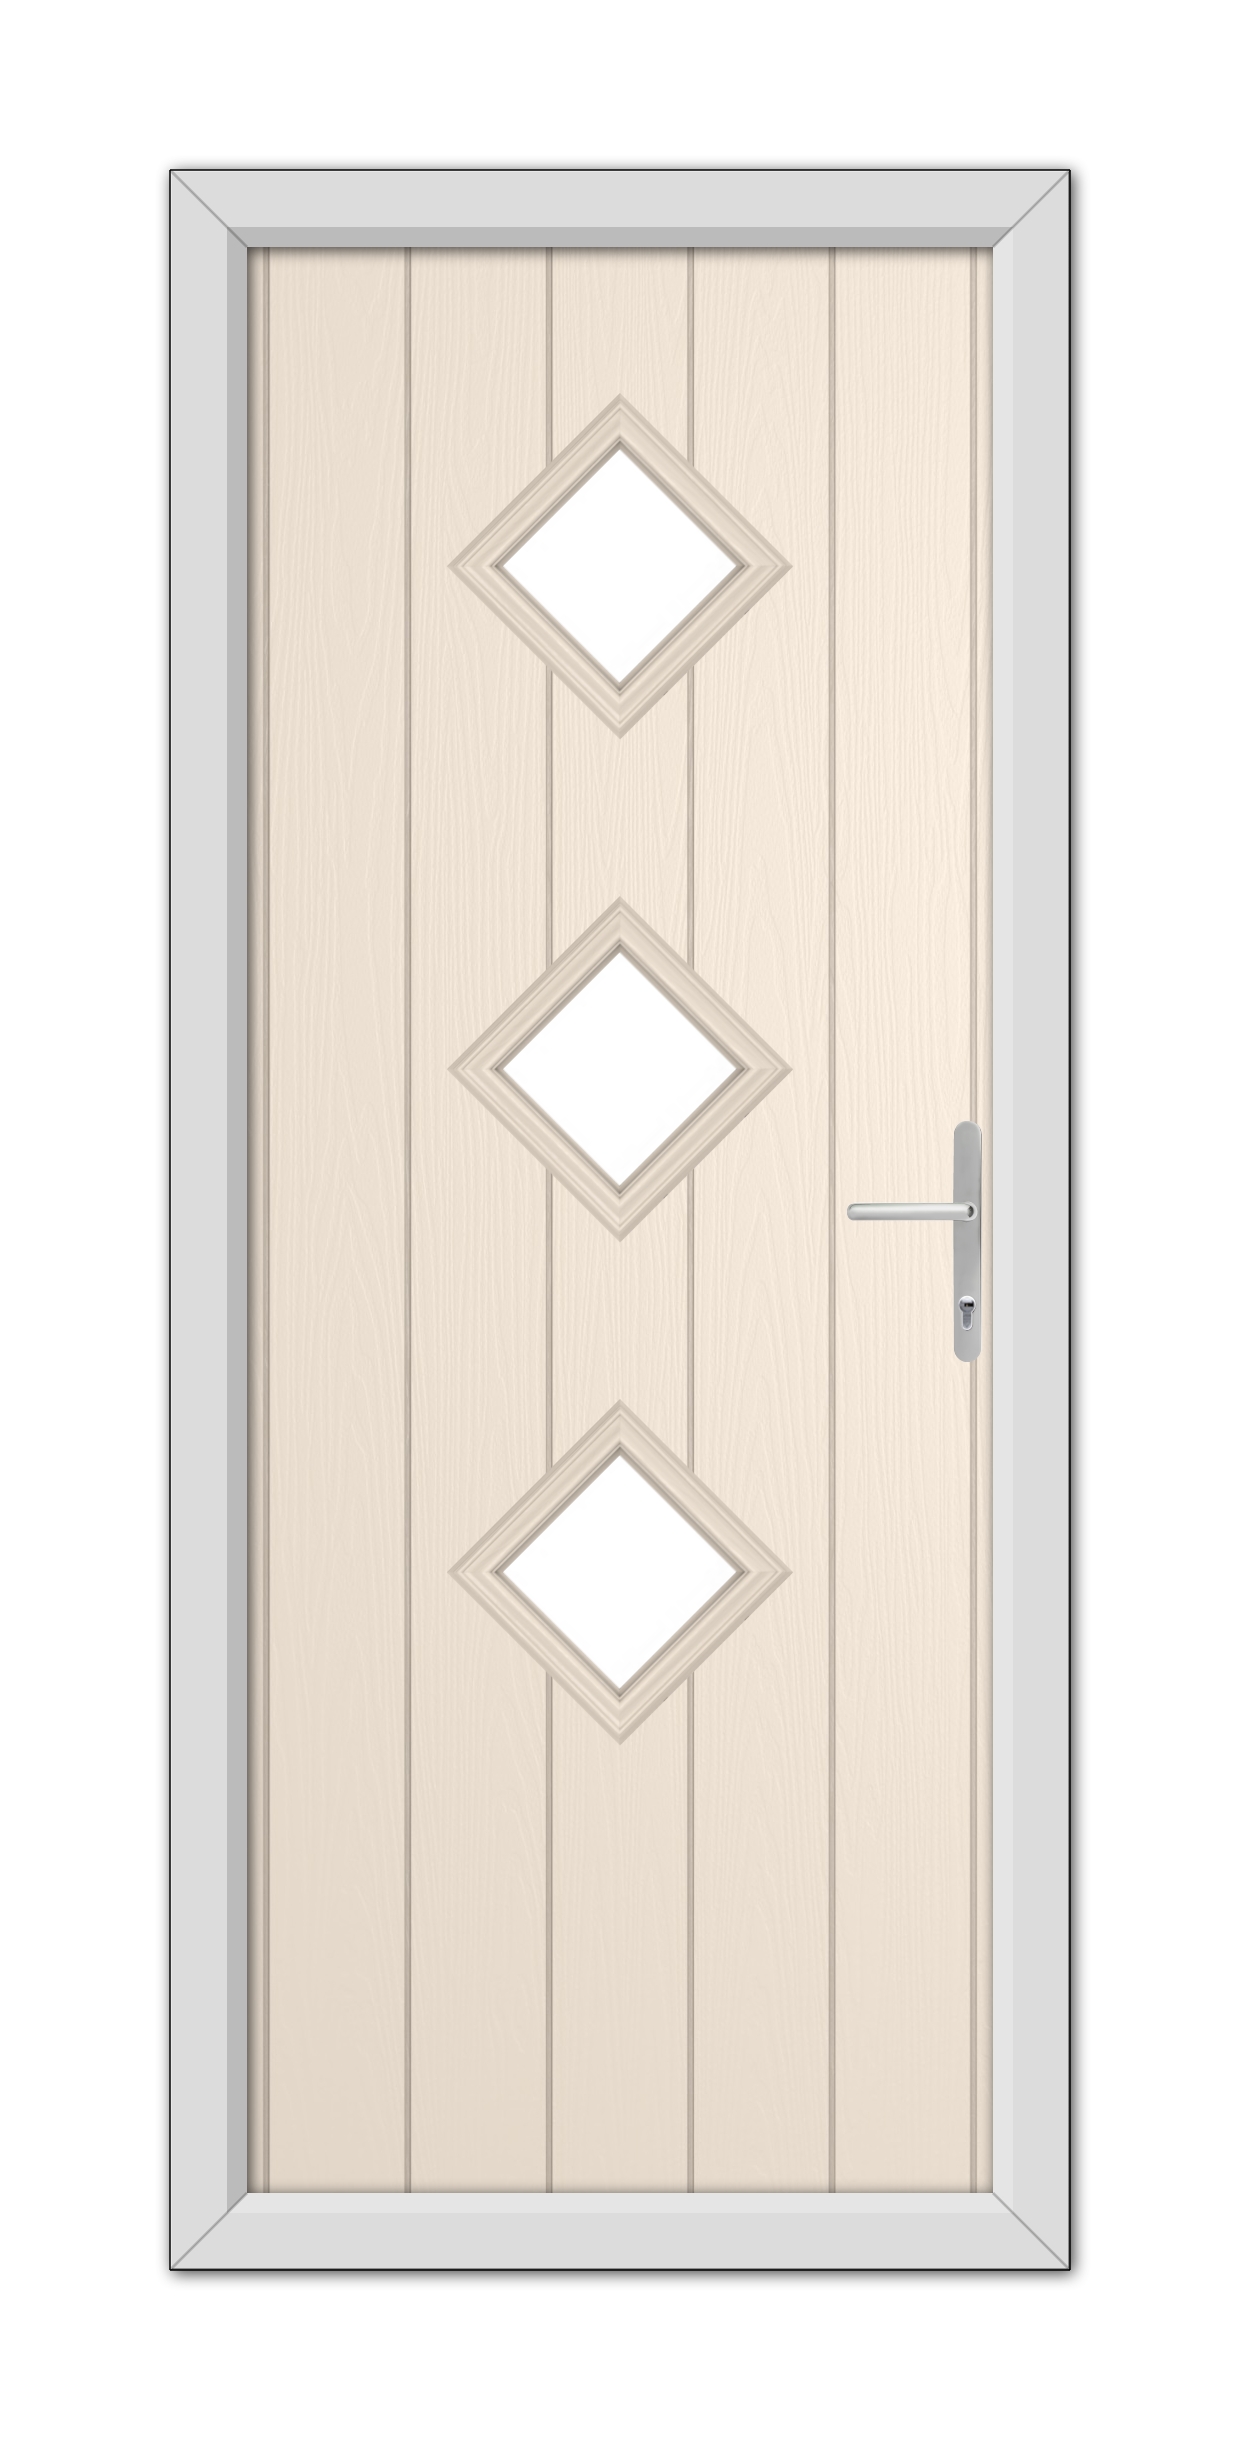 A Cream Richmond Composite Door 48mm Timber Core with three diamond-shaped windows and a modern silver handle, set within a gray frame.